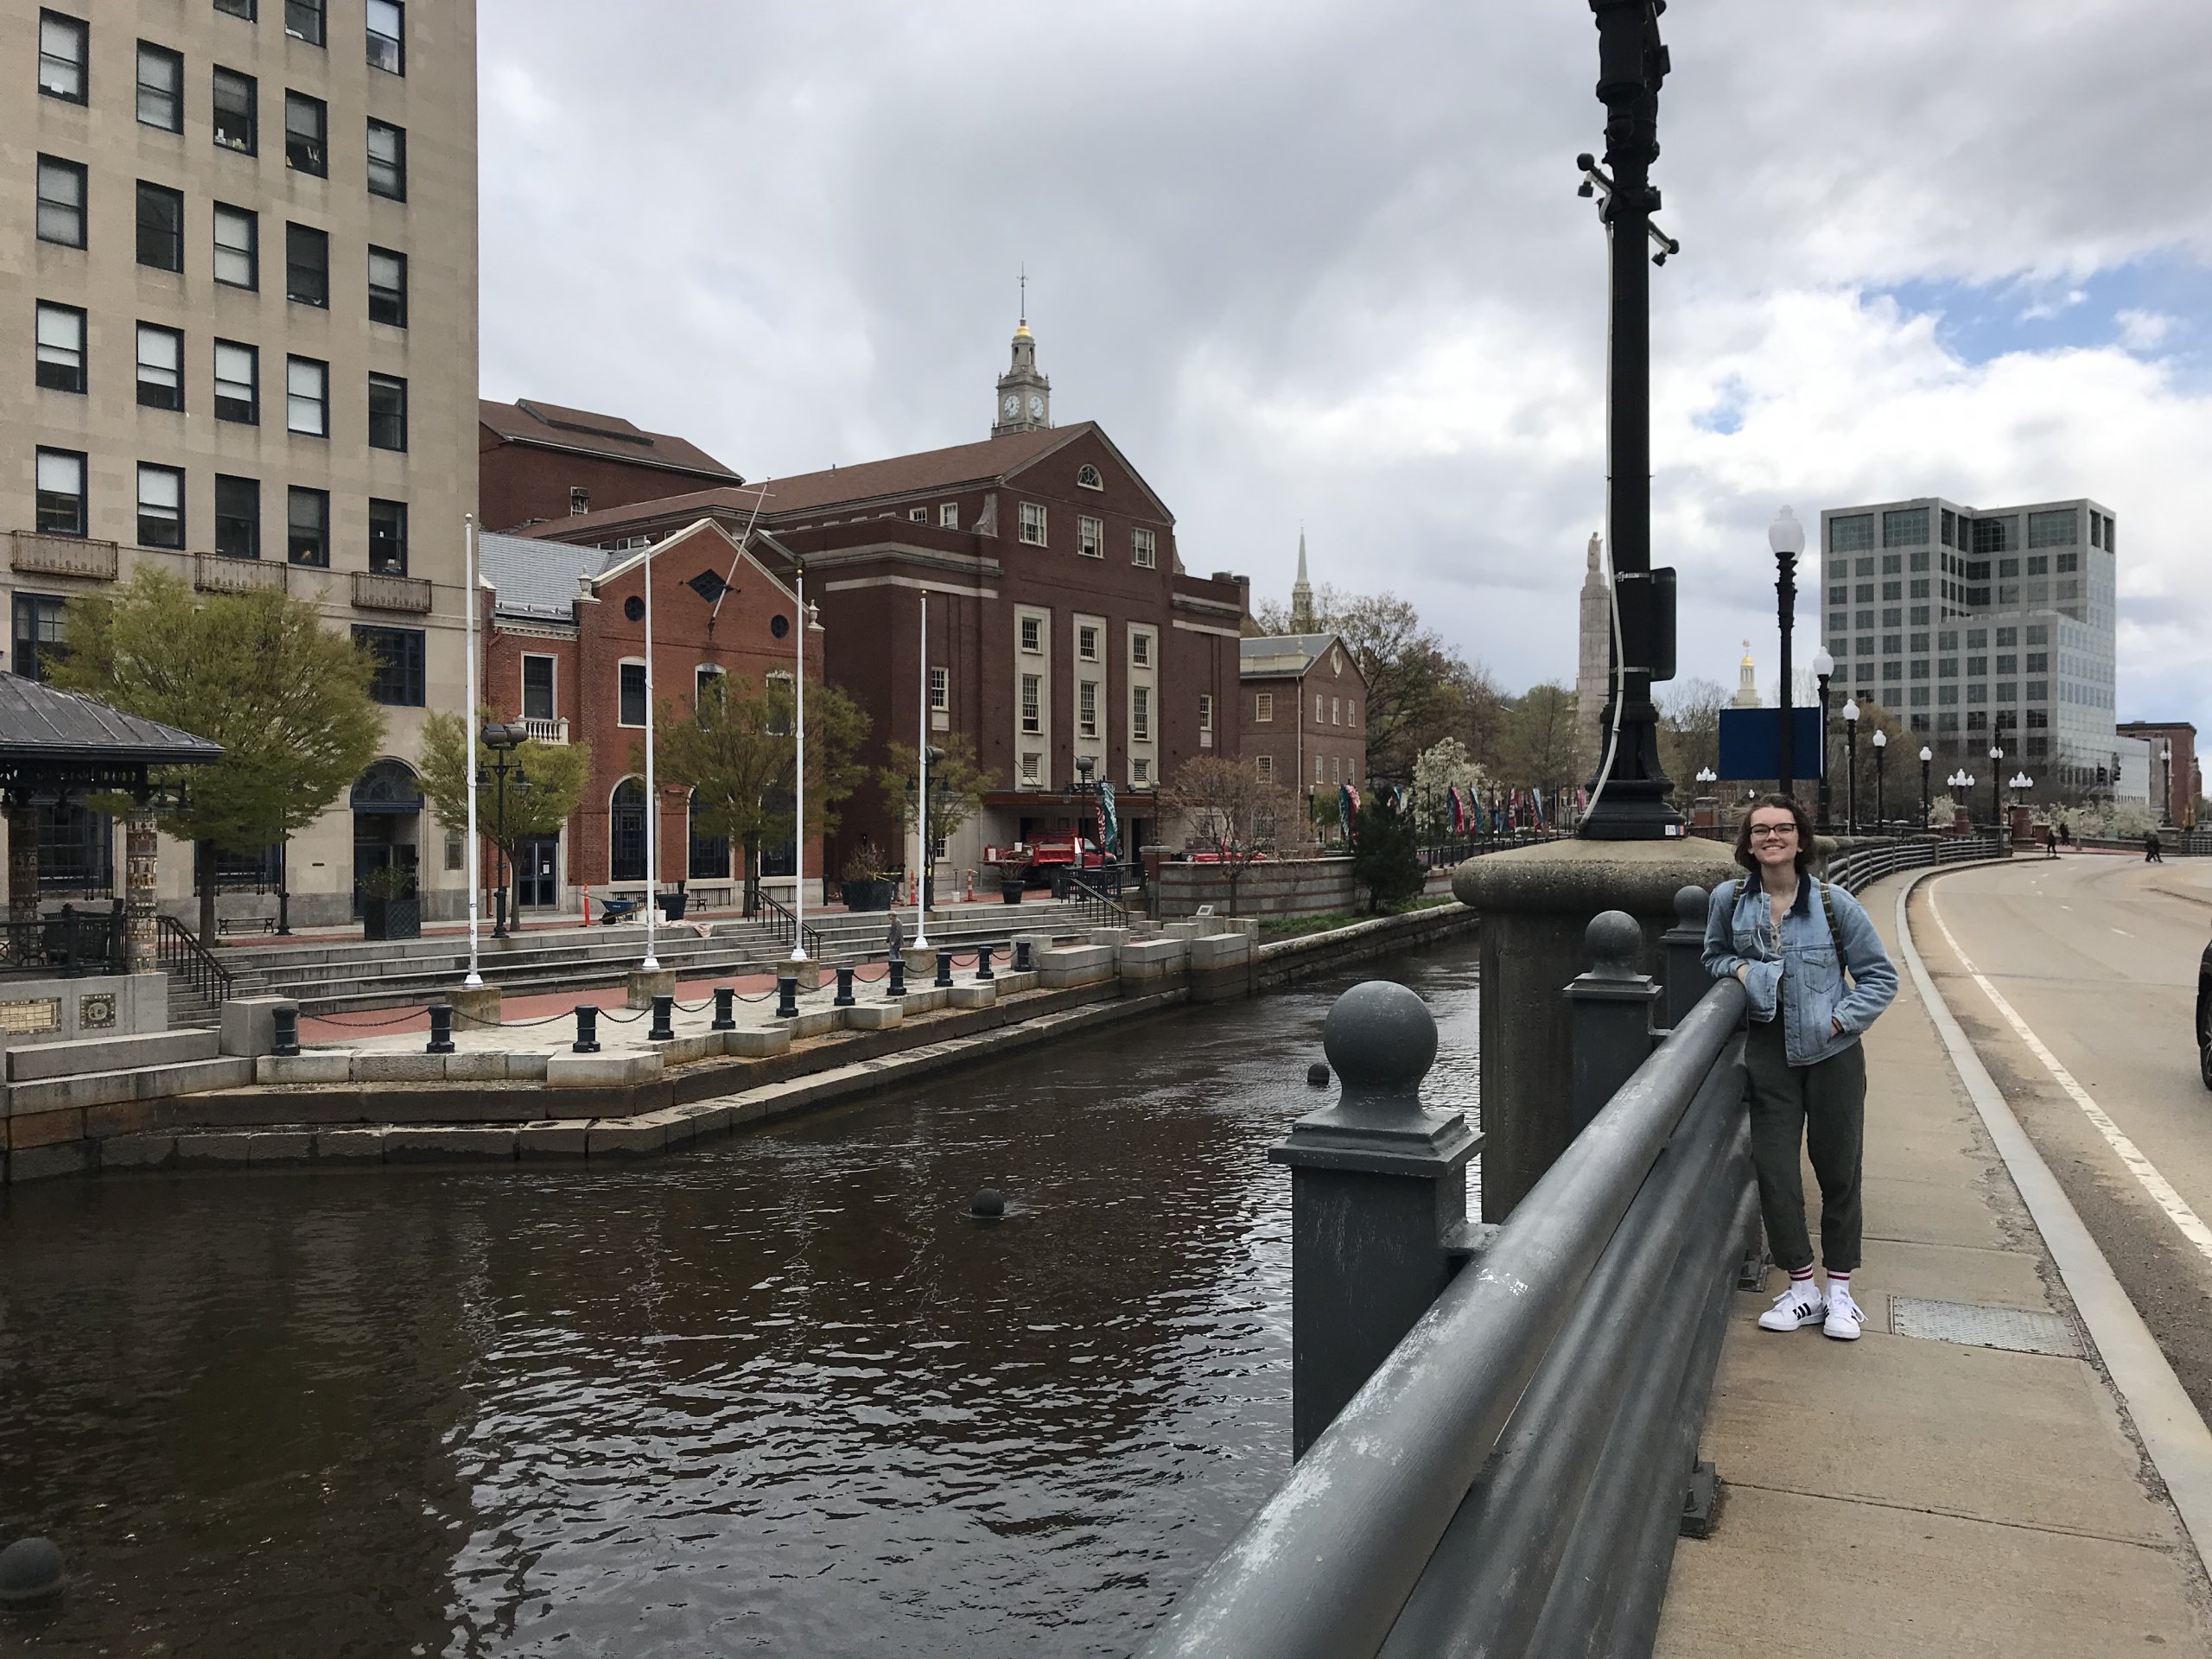 The Providence River runs right through the center of the city.